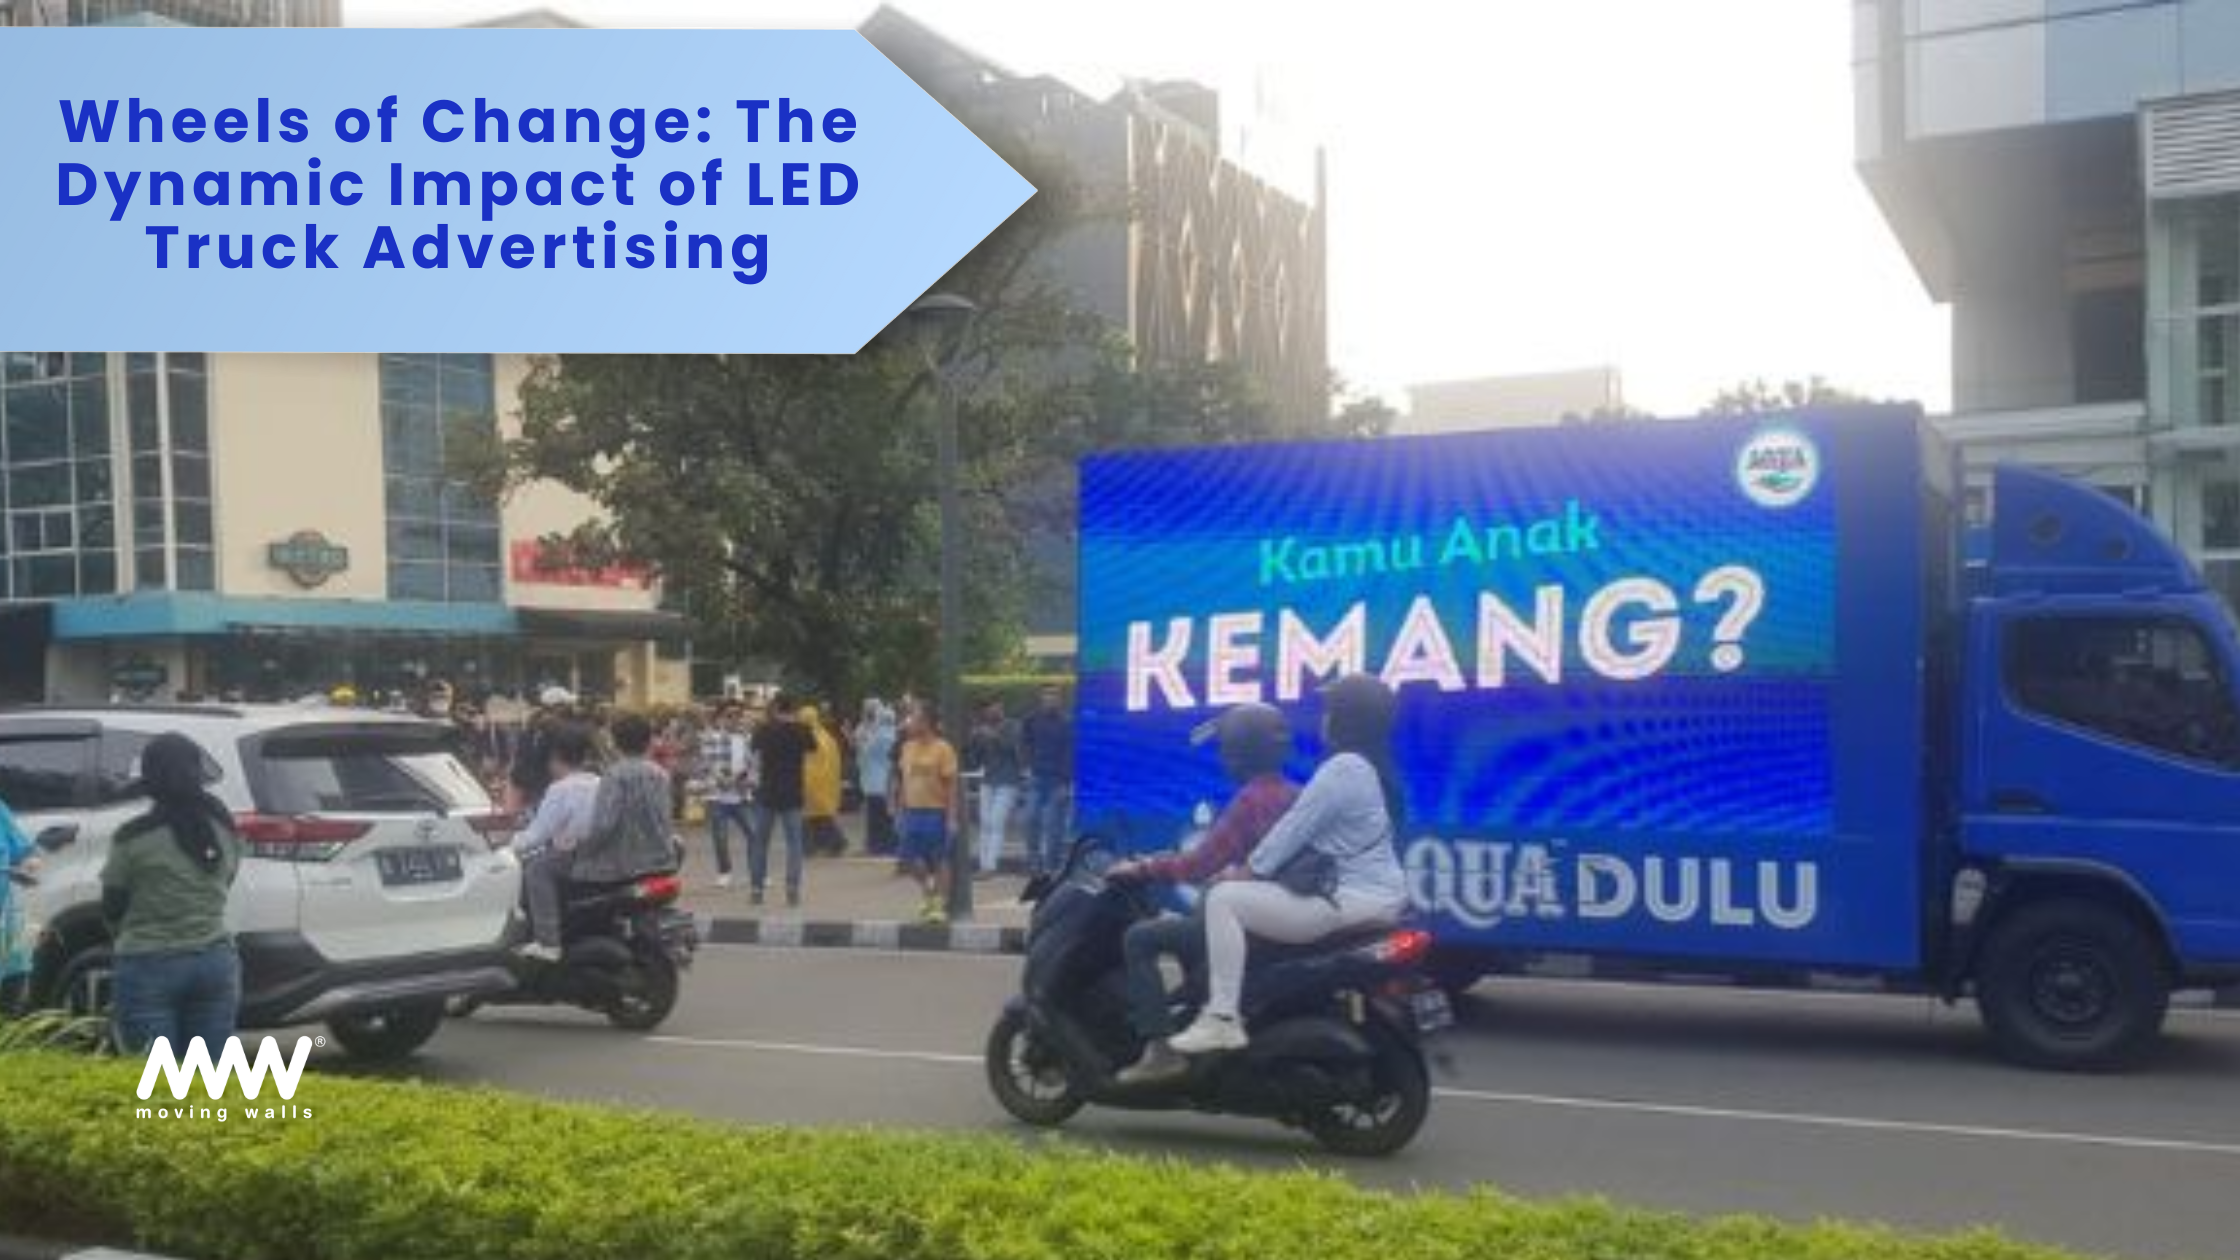 Wheels of Change: The Dynamic Impact of LED Truck Advertising